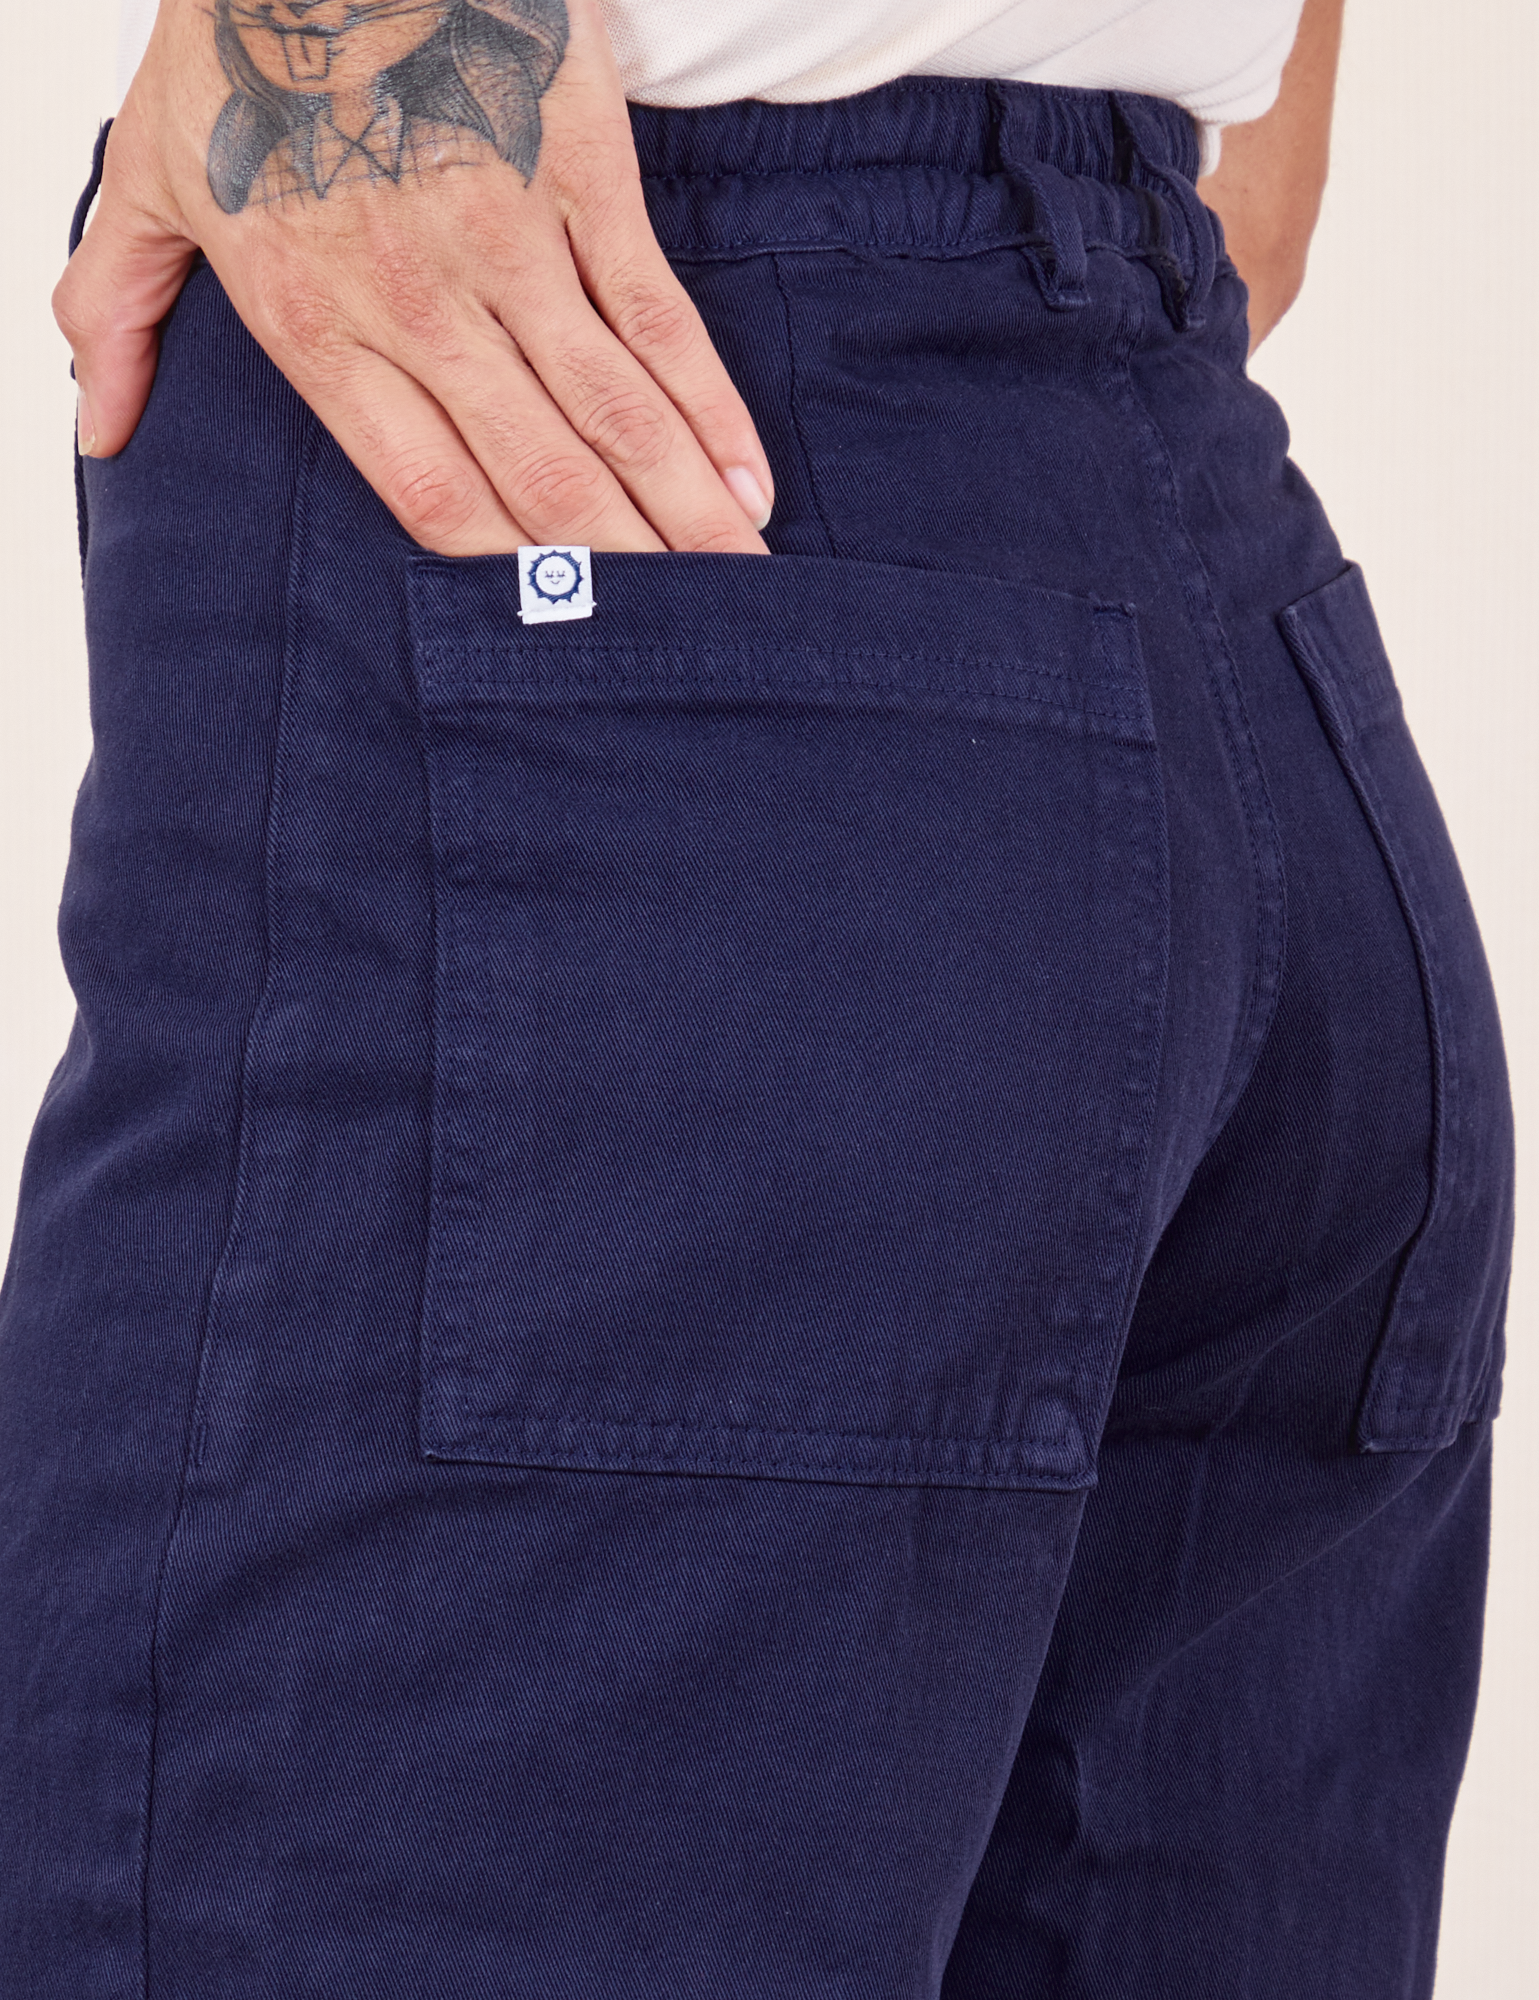 Western Pants in Navy back pocket close up. Jesse has their hand tucked into the pocket.